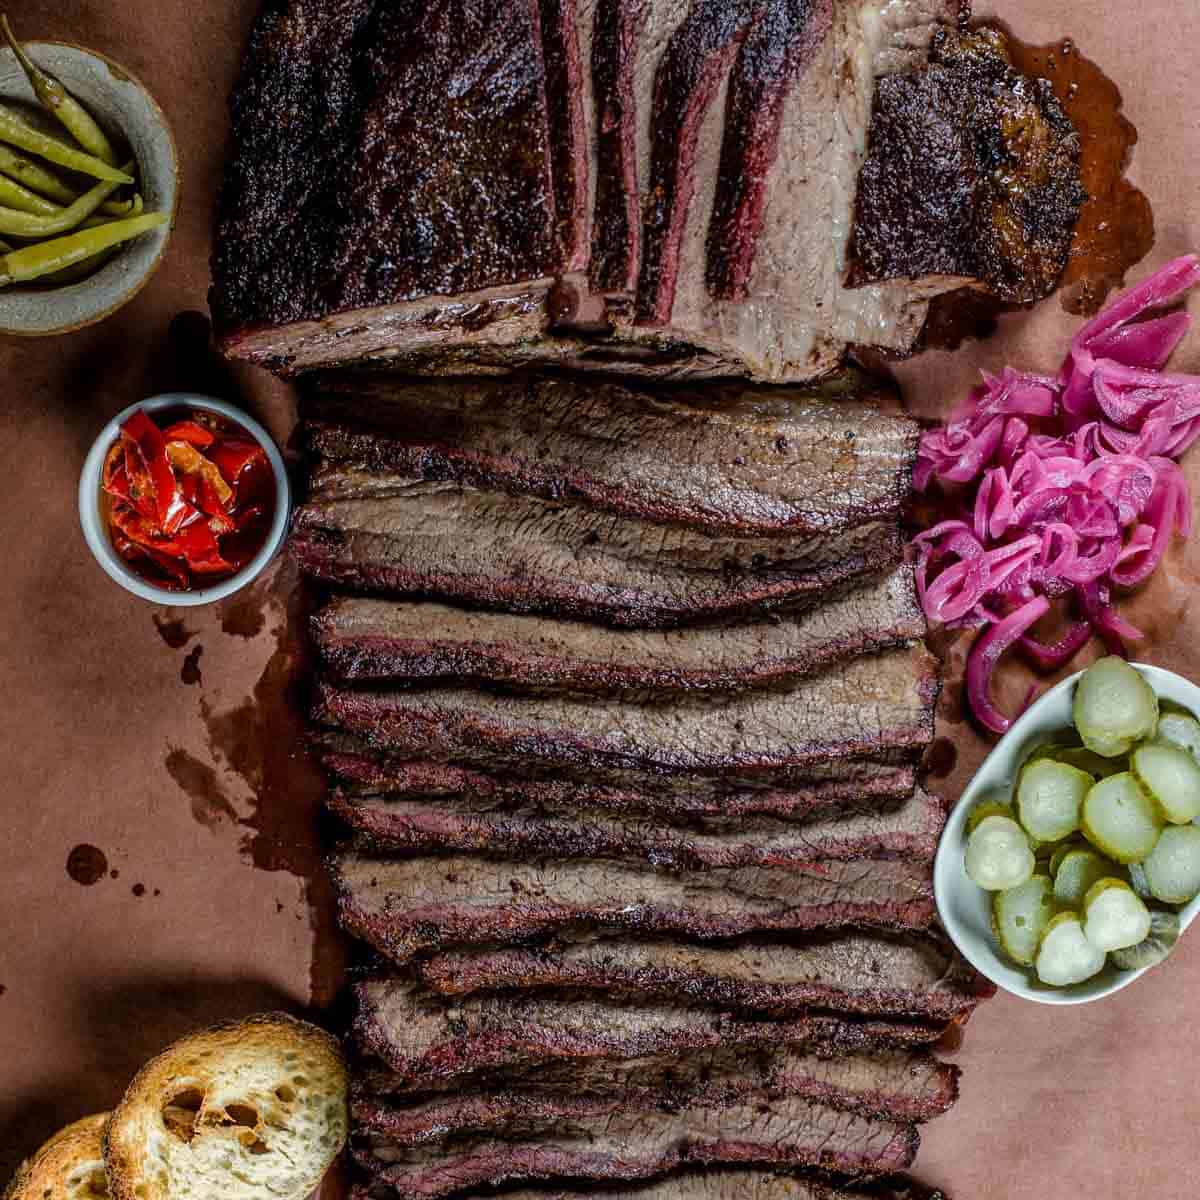 Texas Brisket Wrapped in Butcher Paper - SavoryReviews